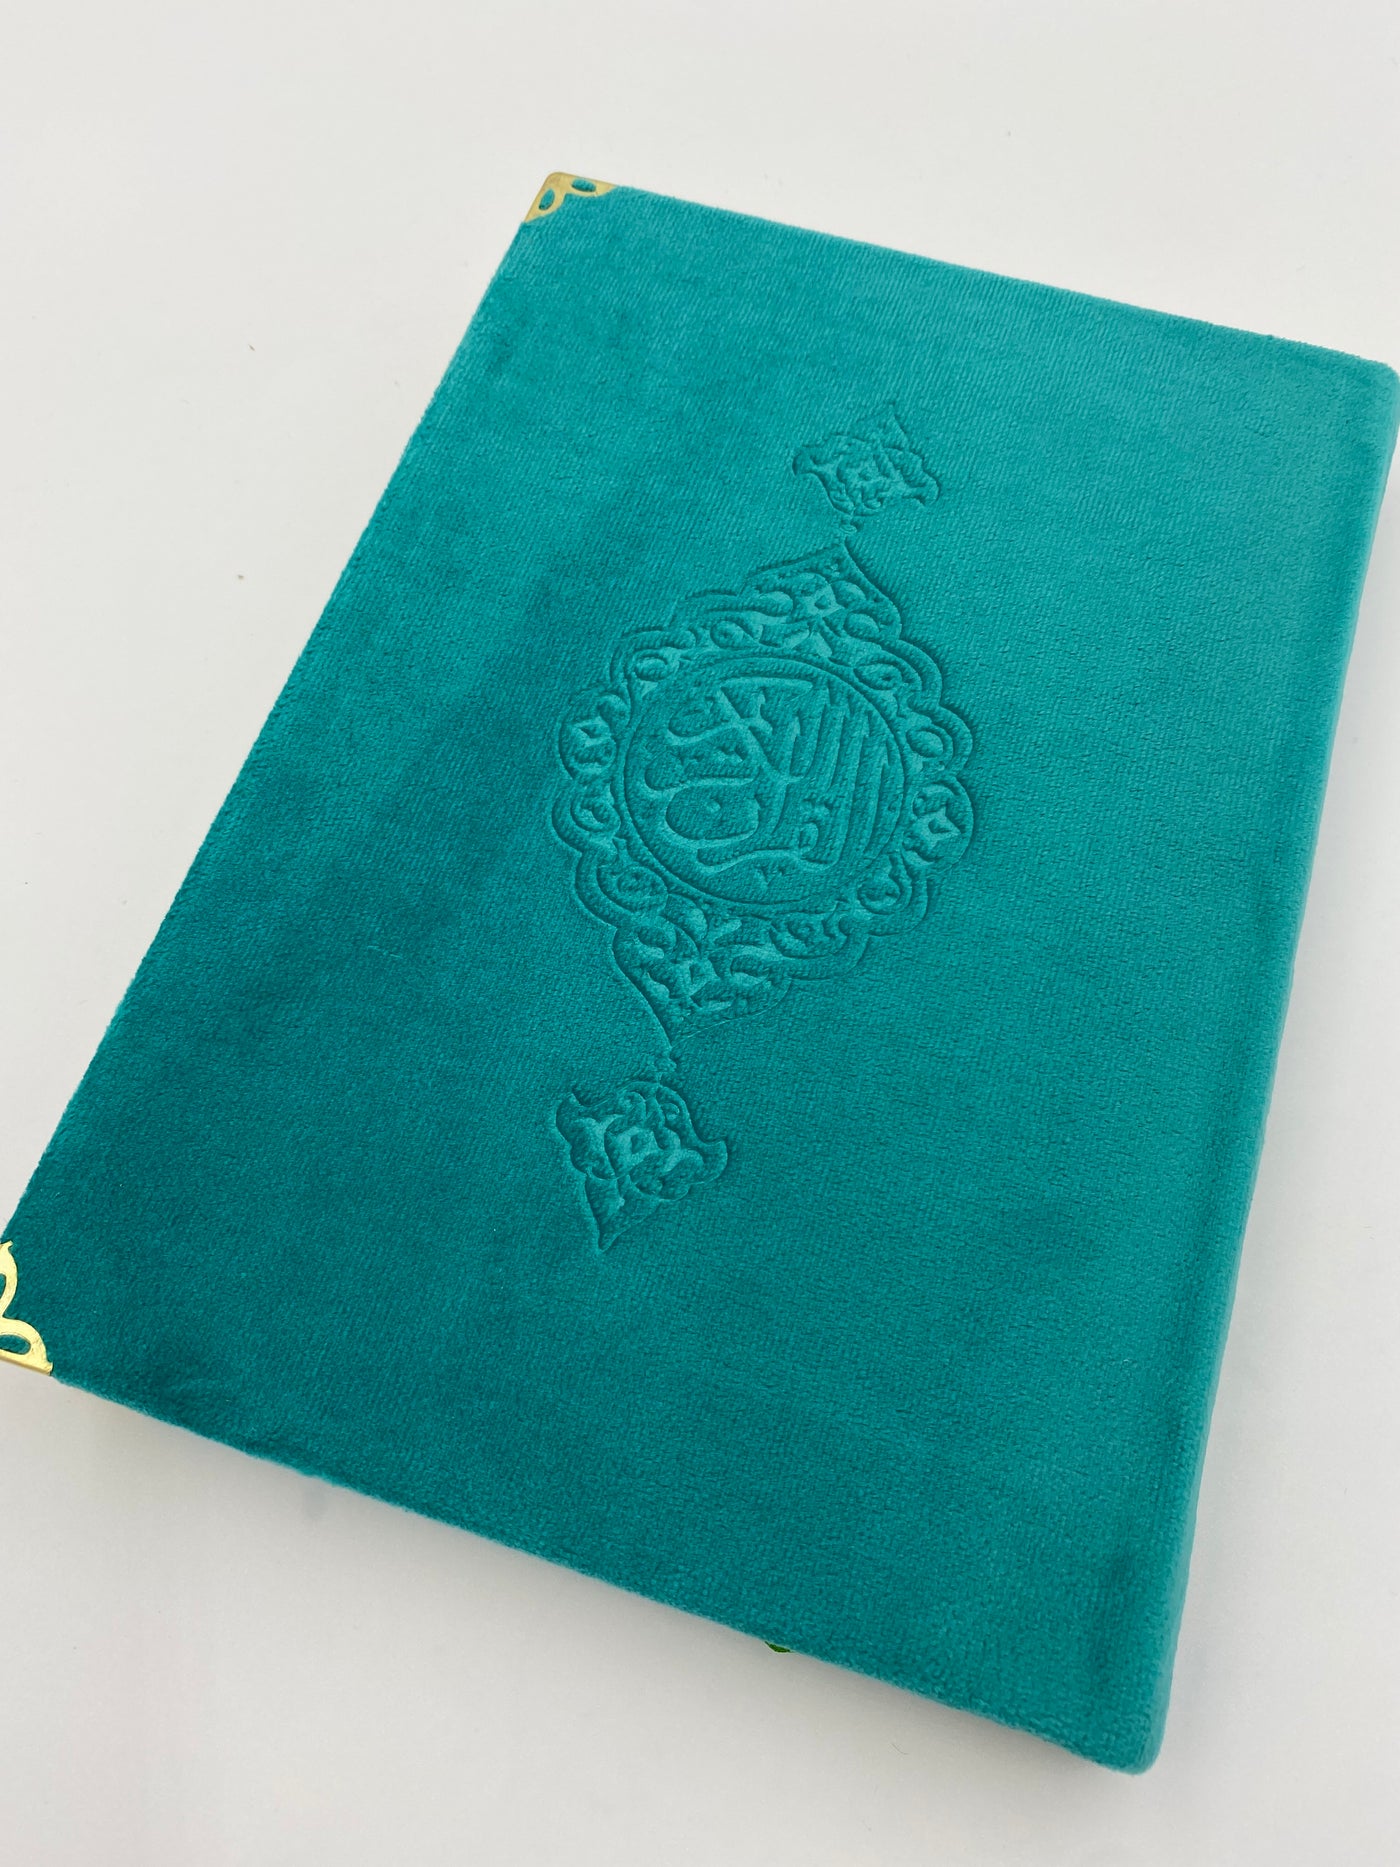 The noble Quran cover in BLUE suede